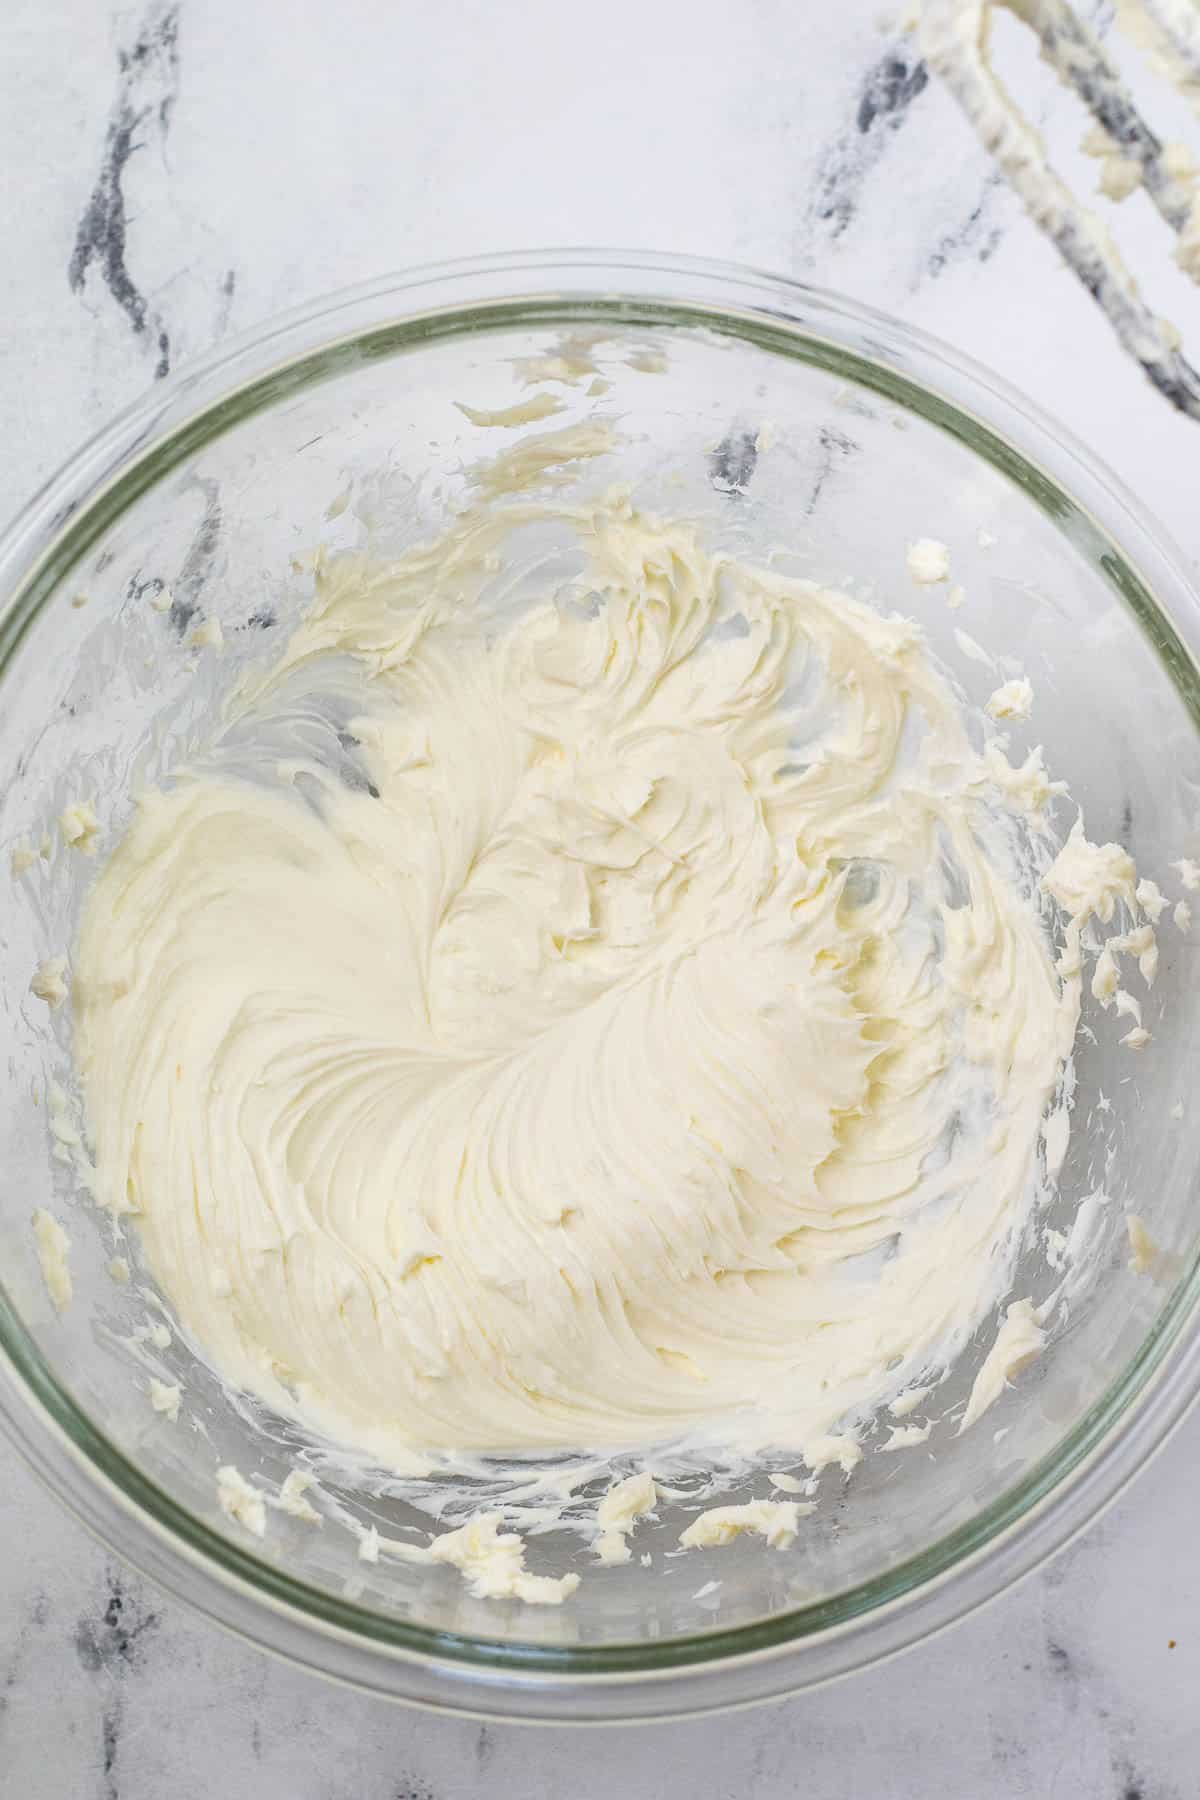 butter and cream cheese creamed together in a big glass bowl.